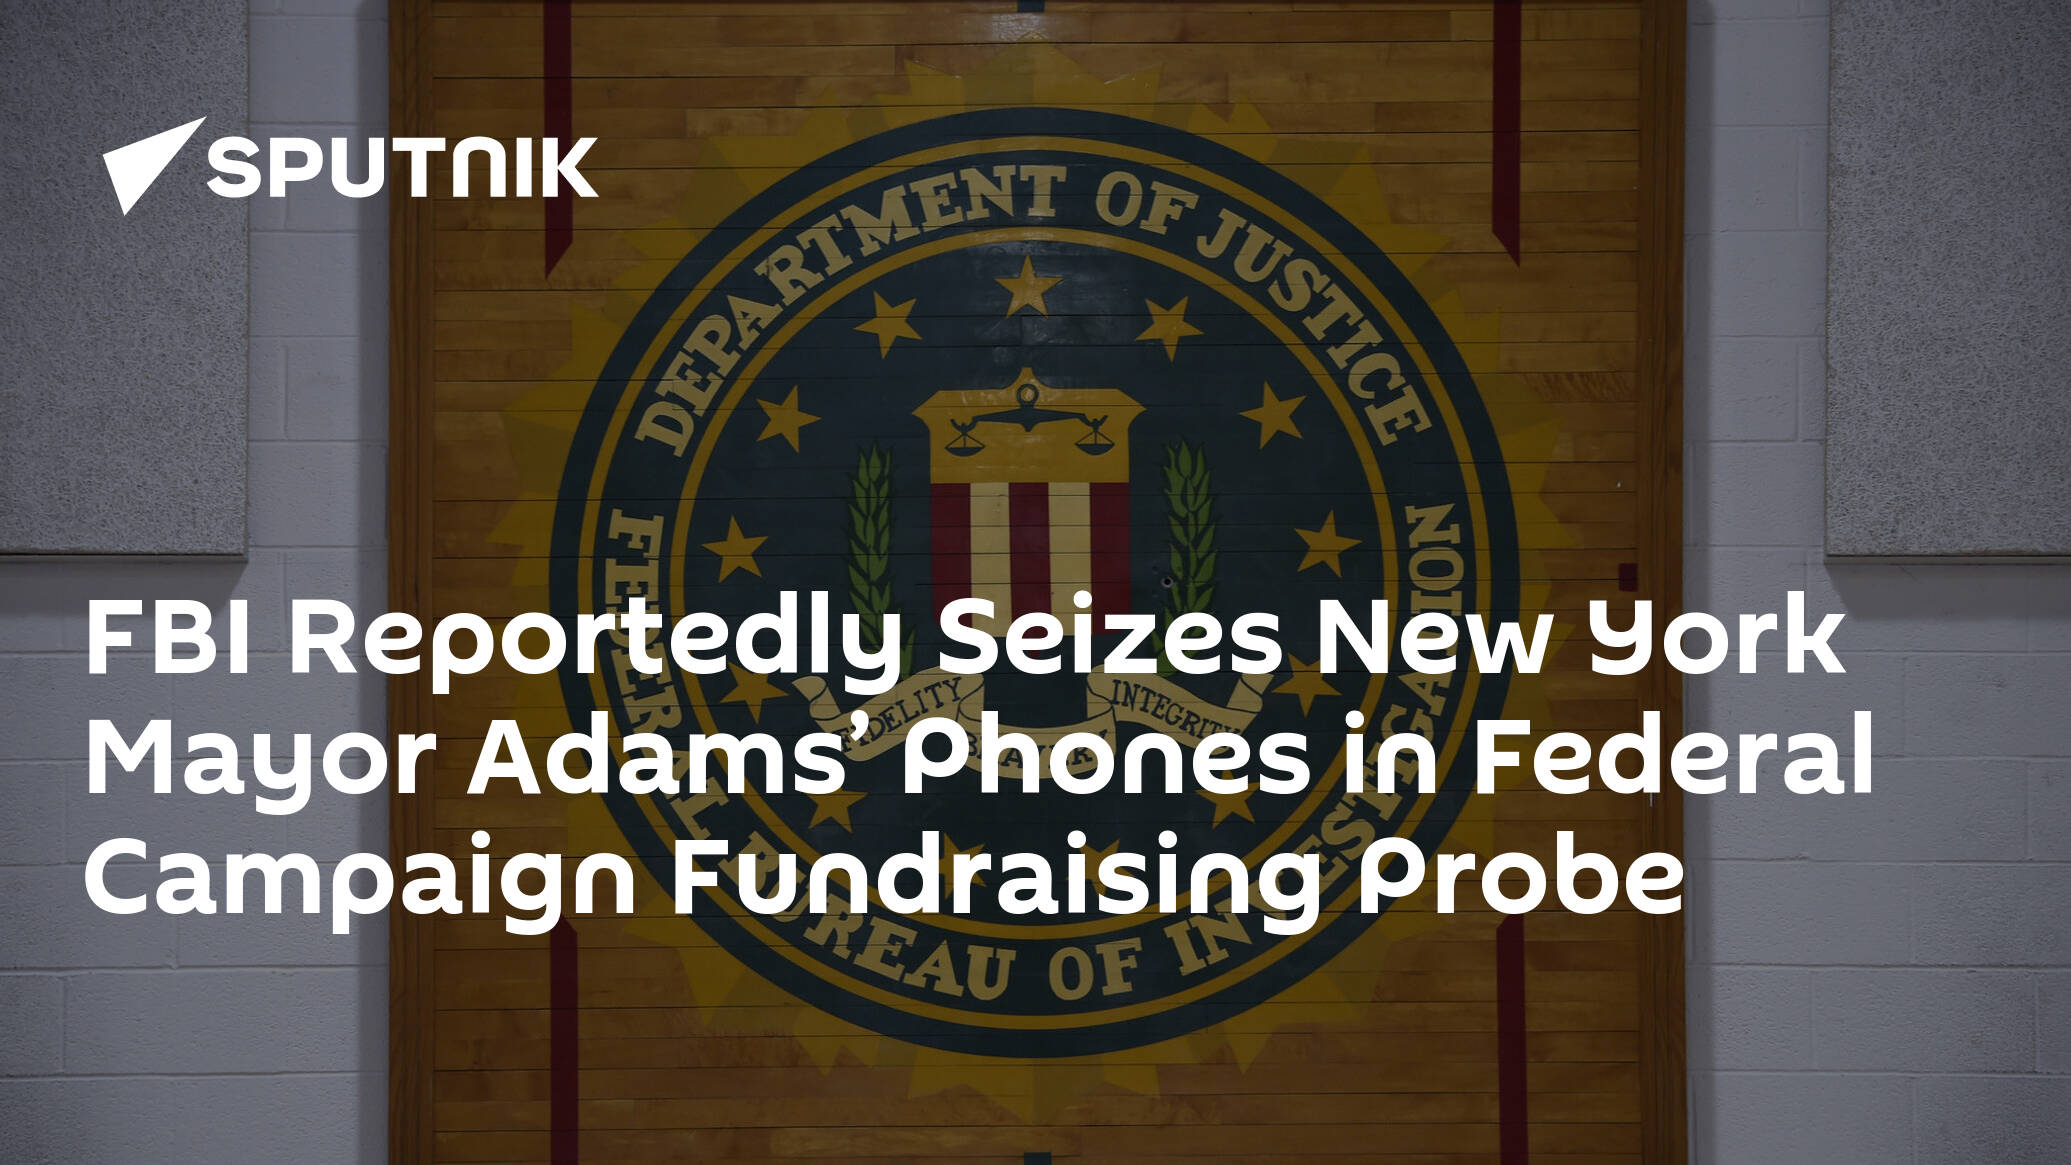 FBI Reportedly Seizes New York Mayor Adams’ Phones in Federal Campaign Fundraising Probe